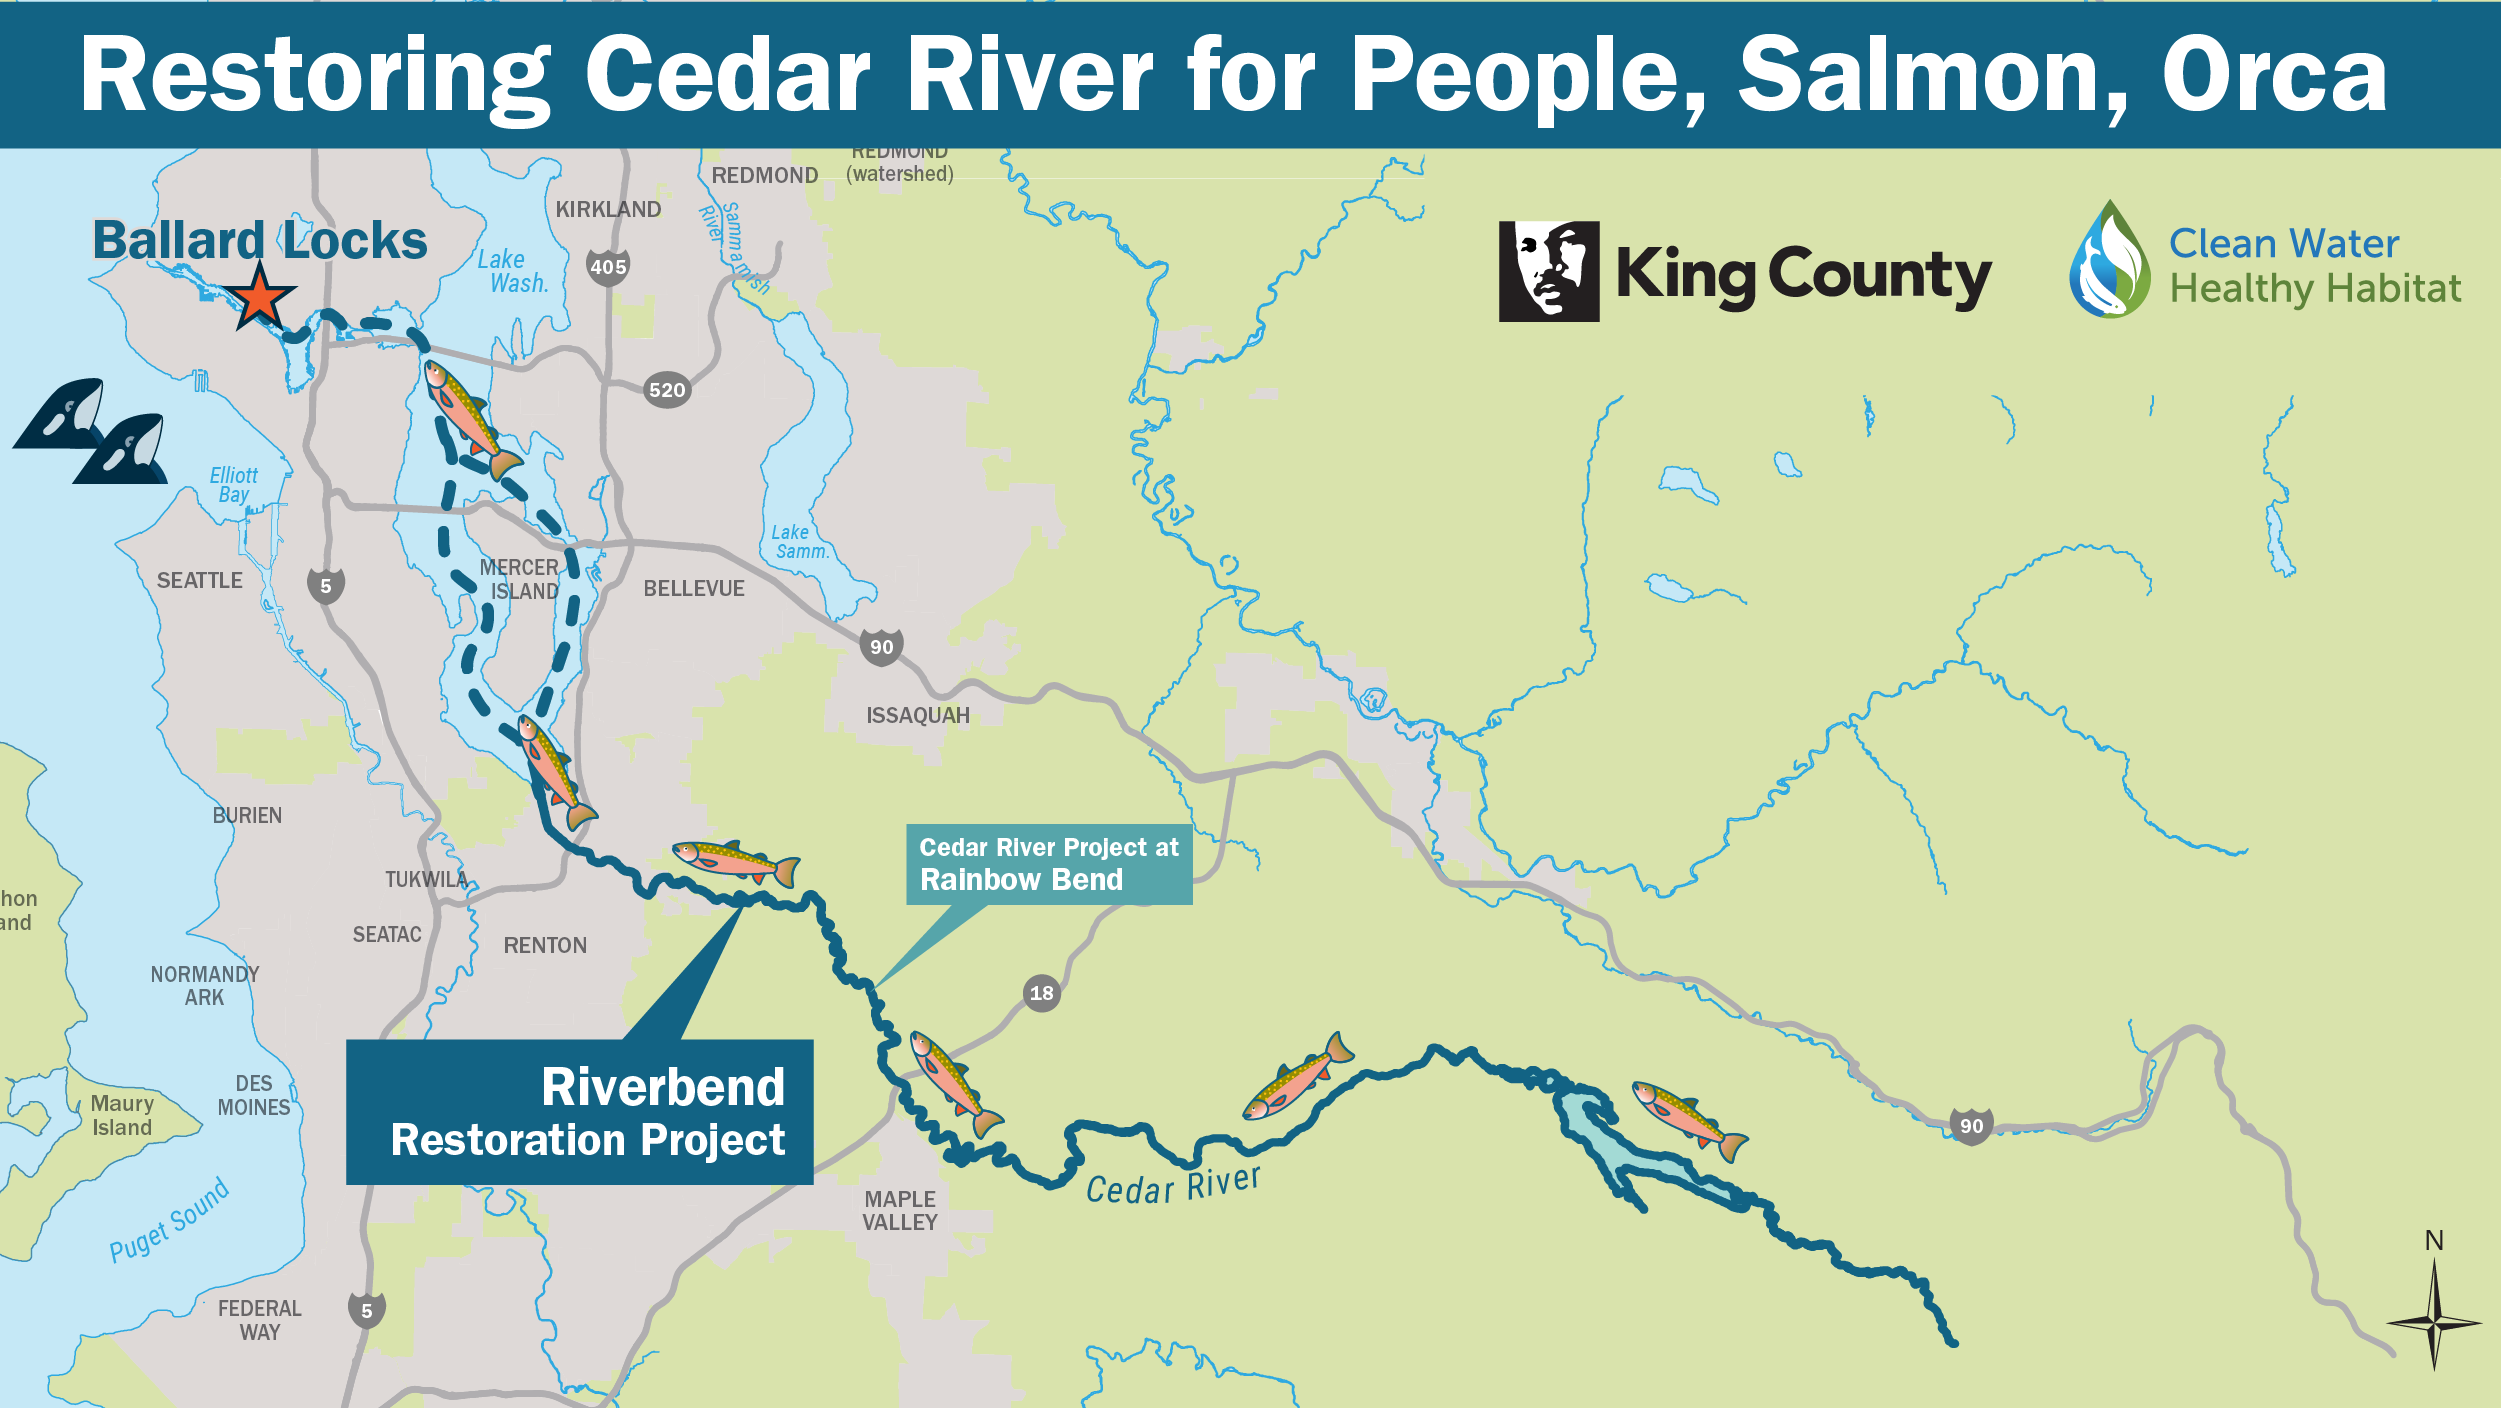 Map showing the location of the Riverbend Restoration Project on the Cedar River between Renton and Maple Valley - click, tap or enter to show a larger map